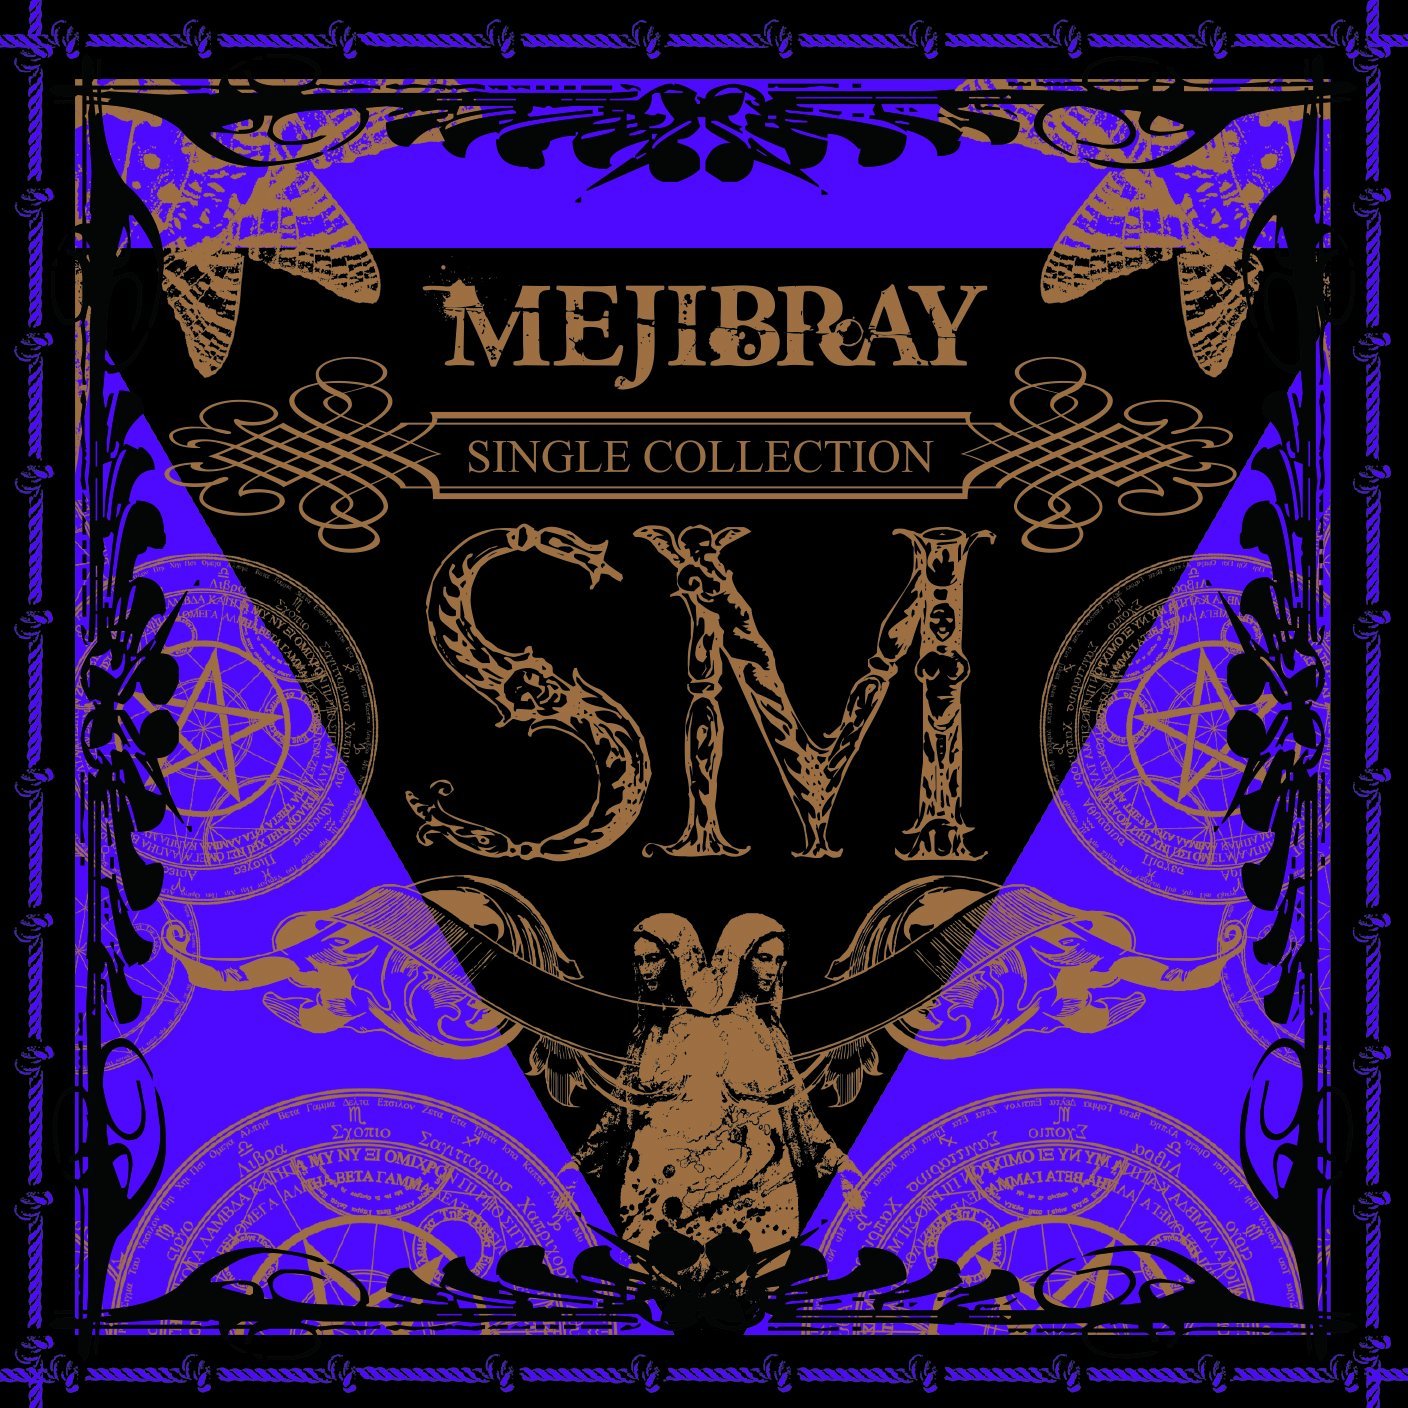 sm 1st single collection second press cover